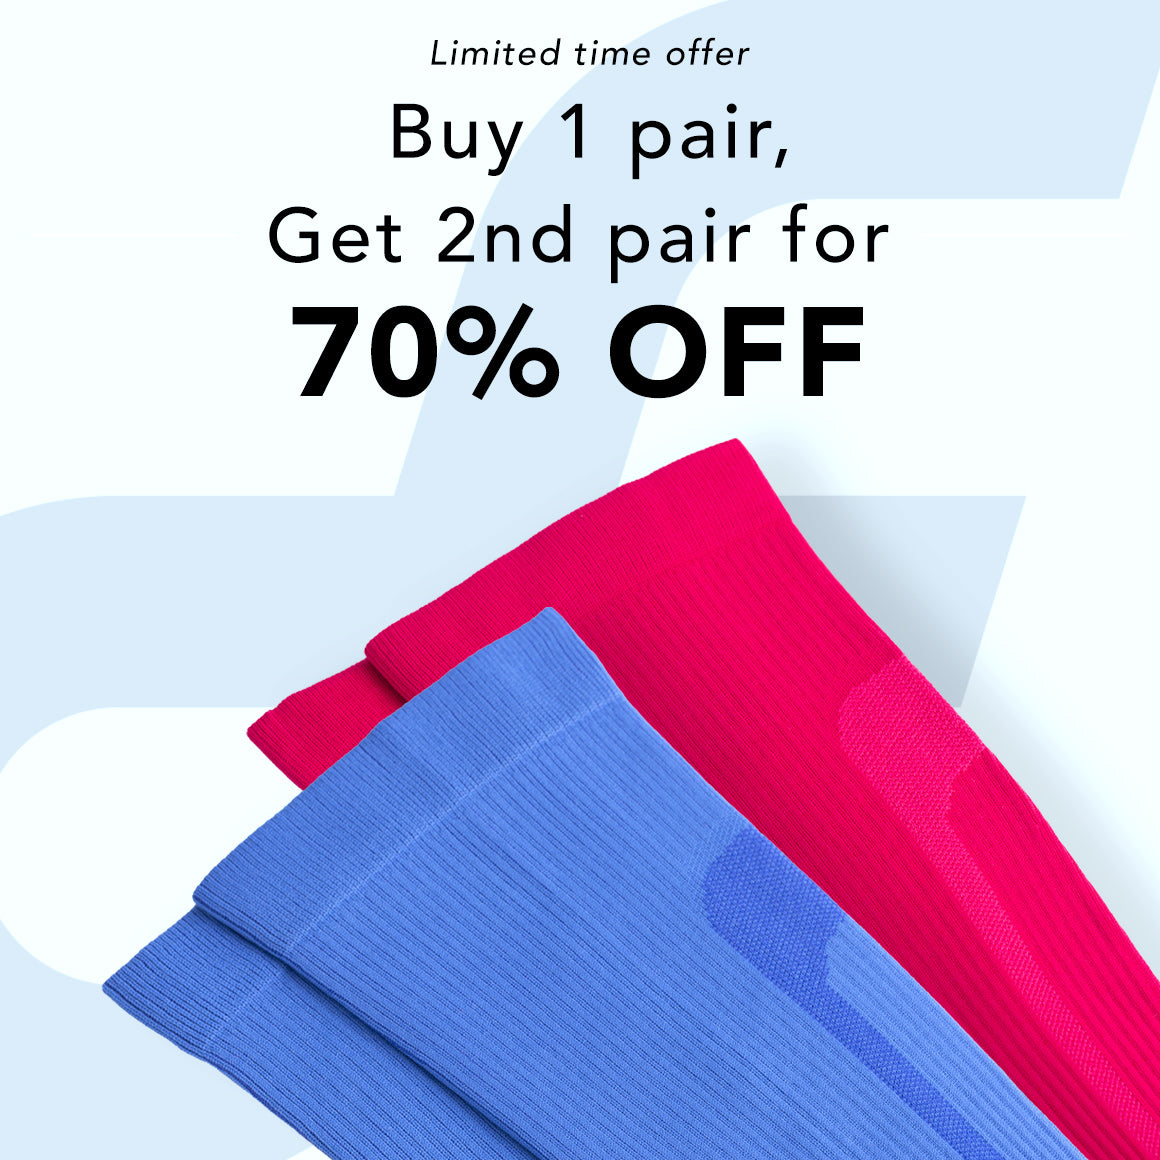 Buy 1 pair, Get 2nd pair for 70% off 